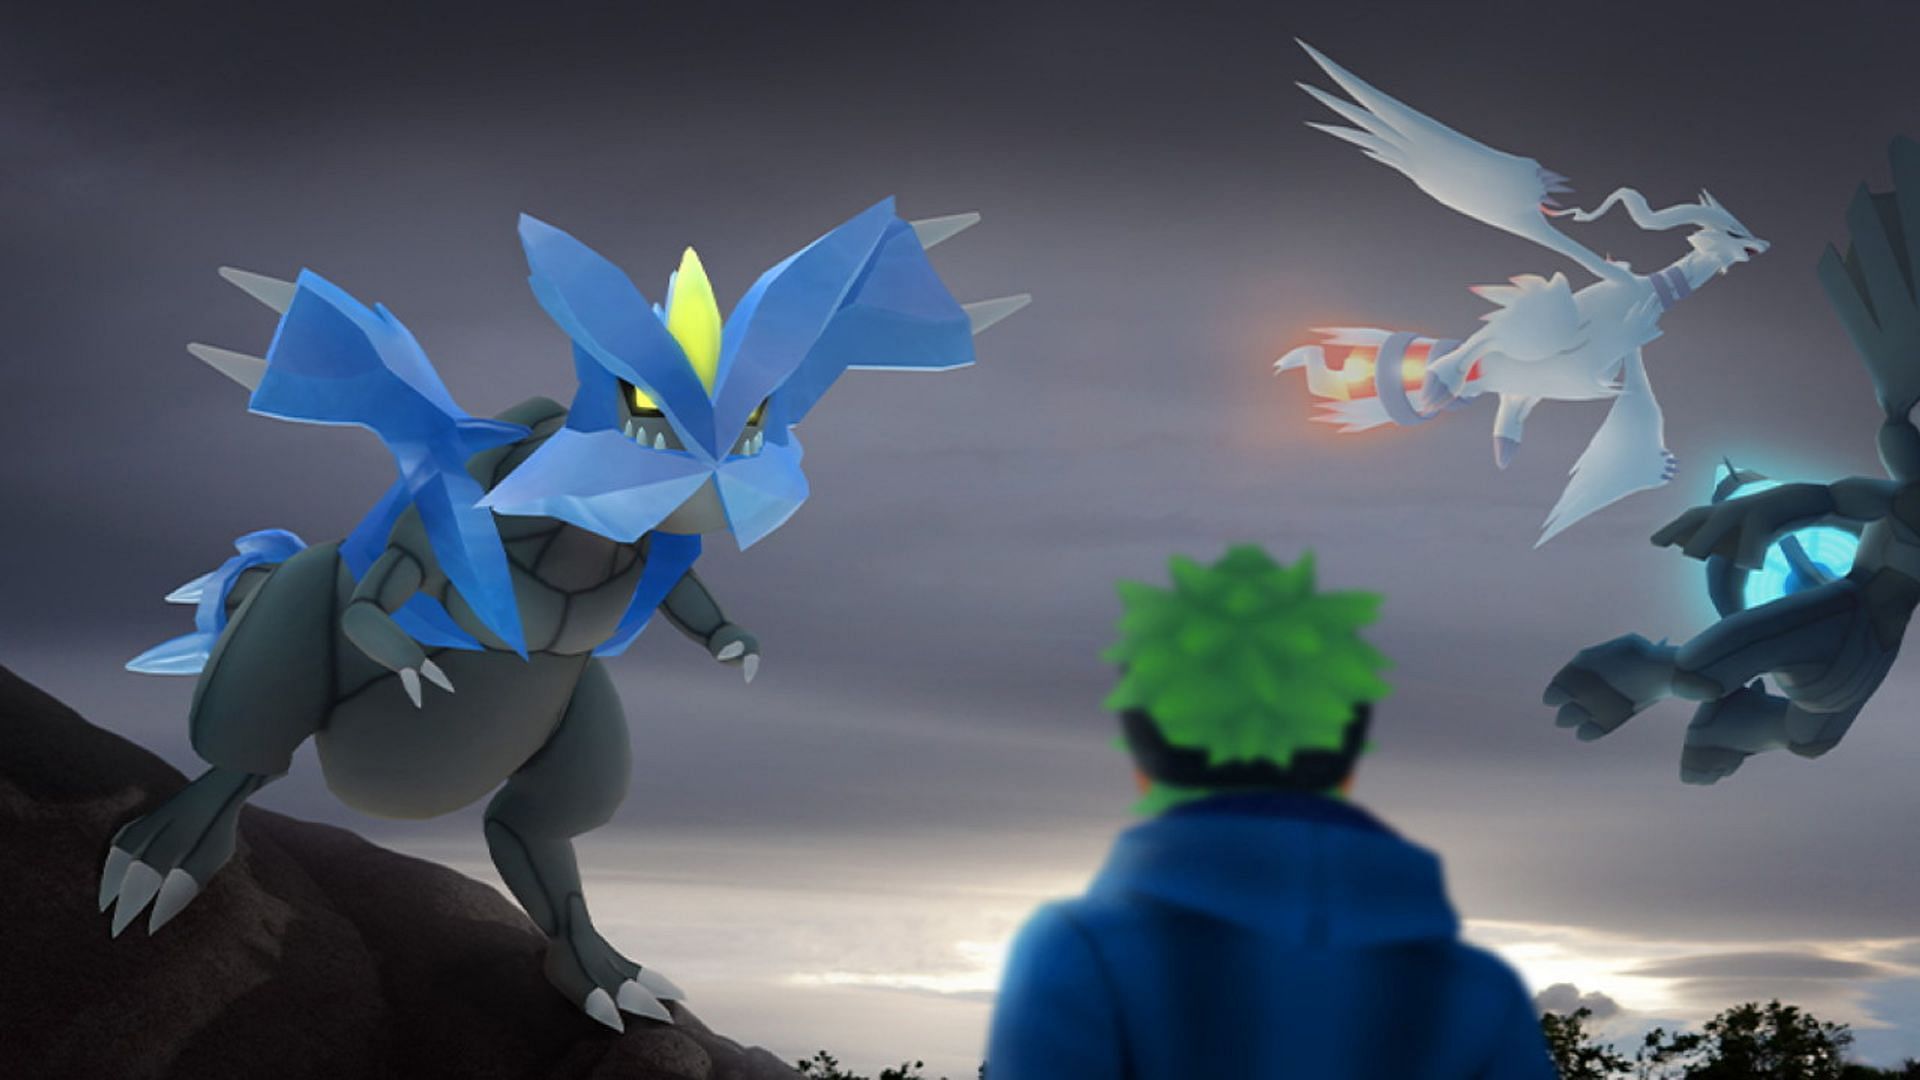 Players lucky enough will be able to find a shiny Kyurem after beating it in a battle. (Image via Niantic)